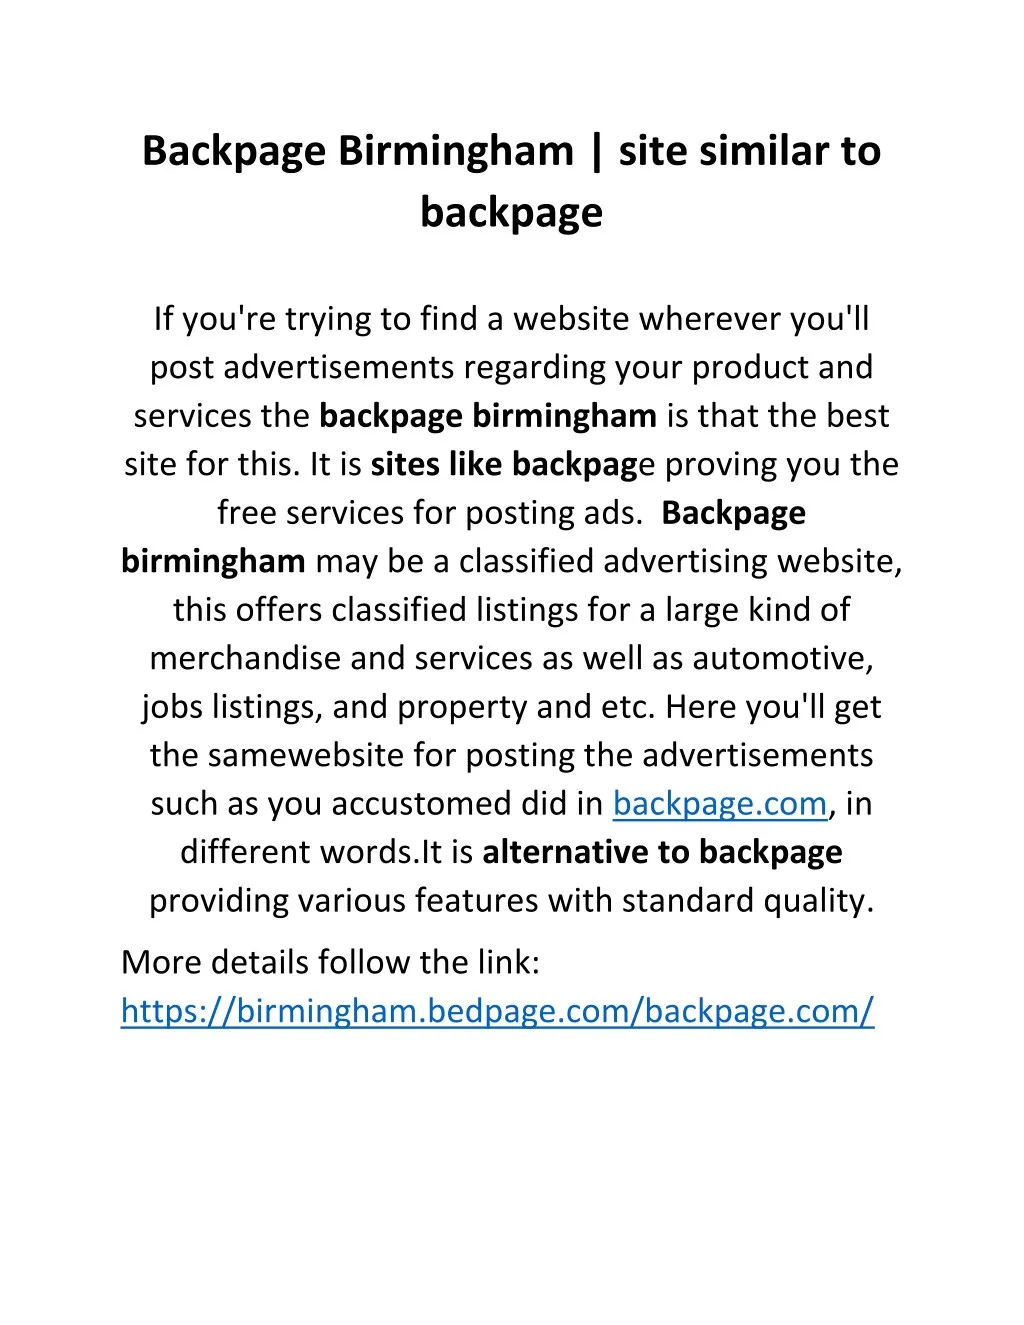 backpage birmingham site similar to backpage